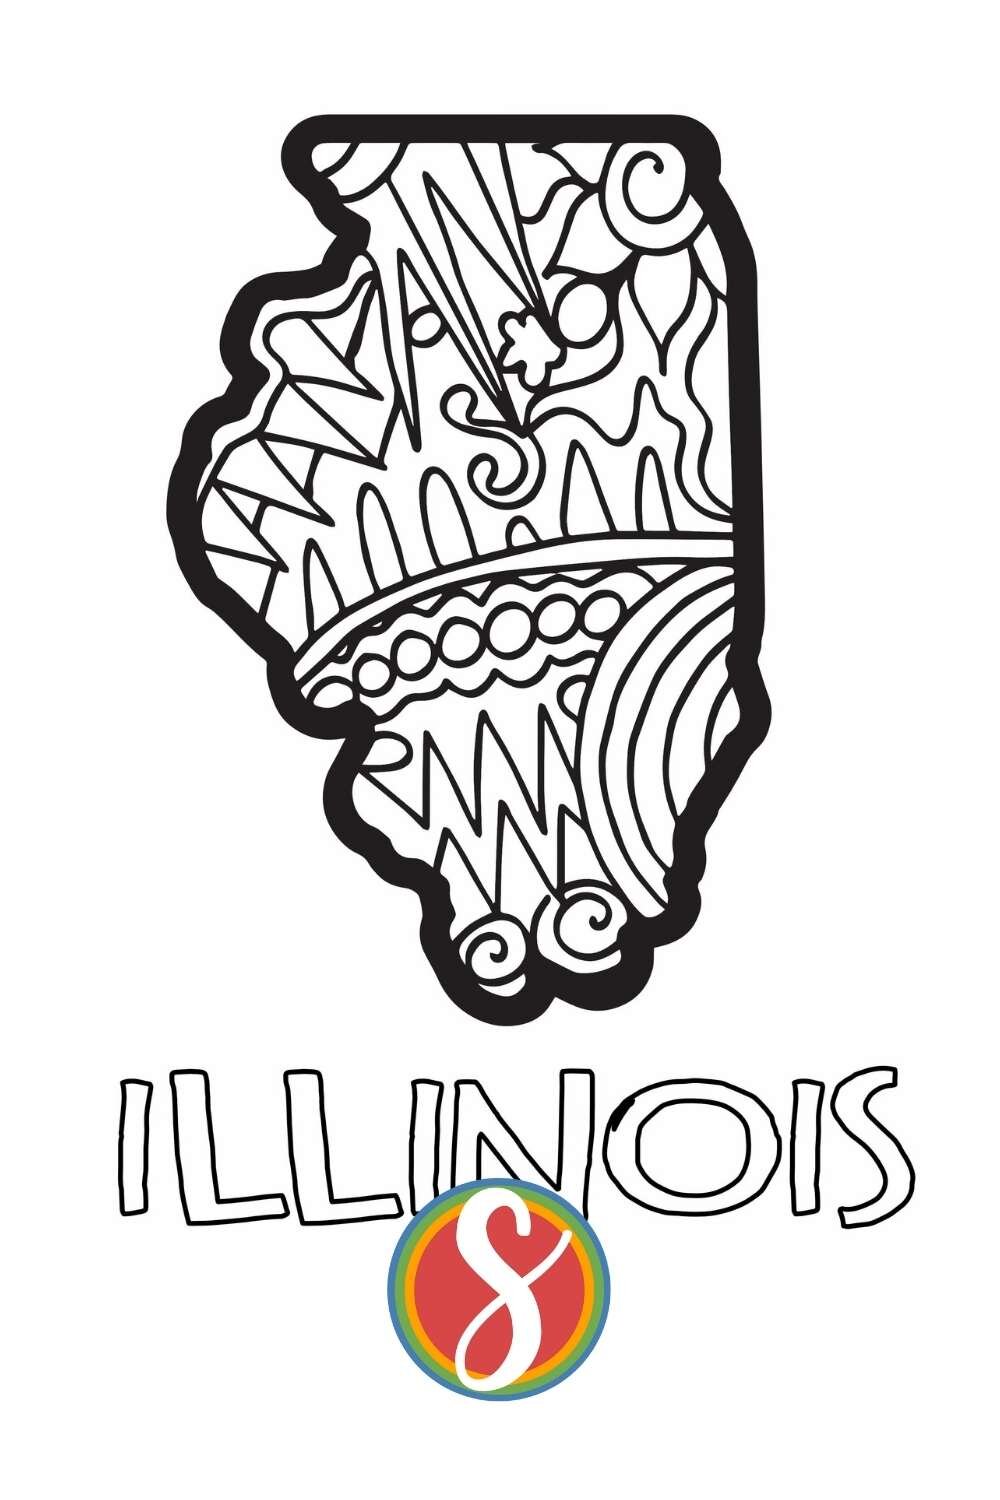 Free printable Illinois coloring page from Stevie Doodles - print and color 4 free Illinois-themed activity pages in this post from Stevie Doodles and find your state too!